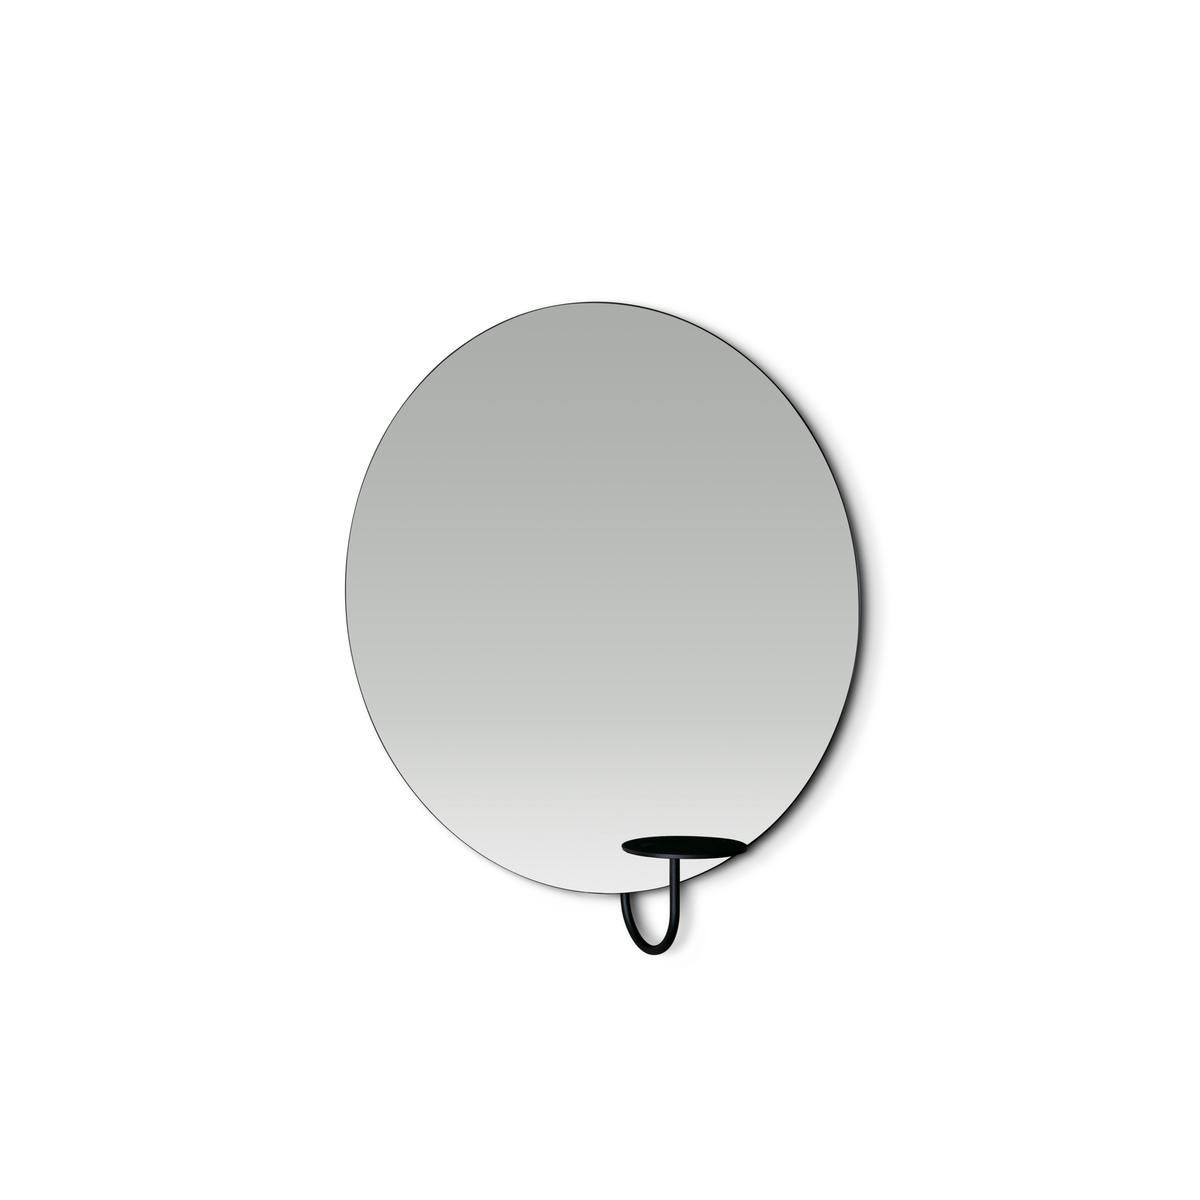 Miró Miró
Wall mirror
Design: Friends & Founders

Shape: Round
Size: Large
Glass color: Clear, Grey Mist or Bronze
Metal finish: Black or Brass


Contemporary design studio Friends & Founders was founded in 2003 by IDA Linea and Rasmus